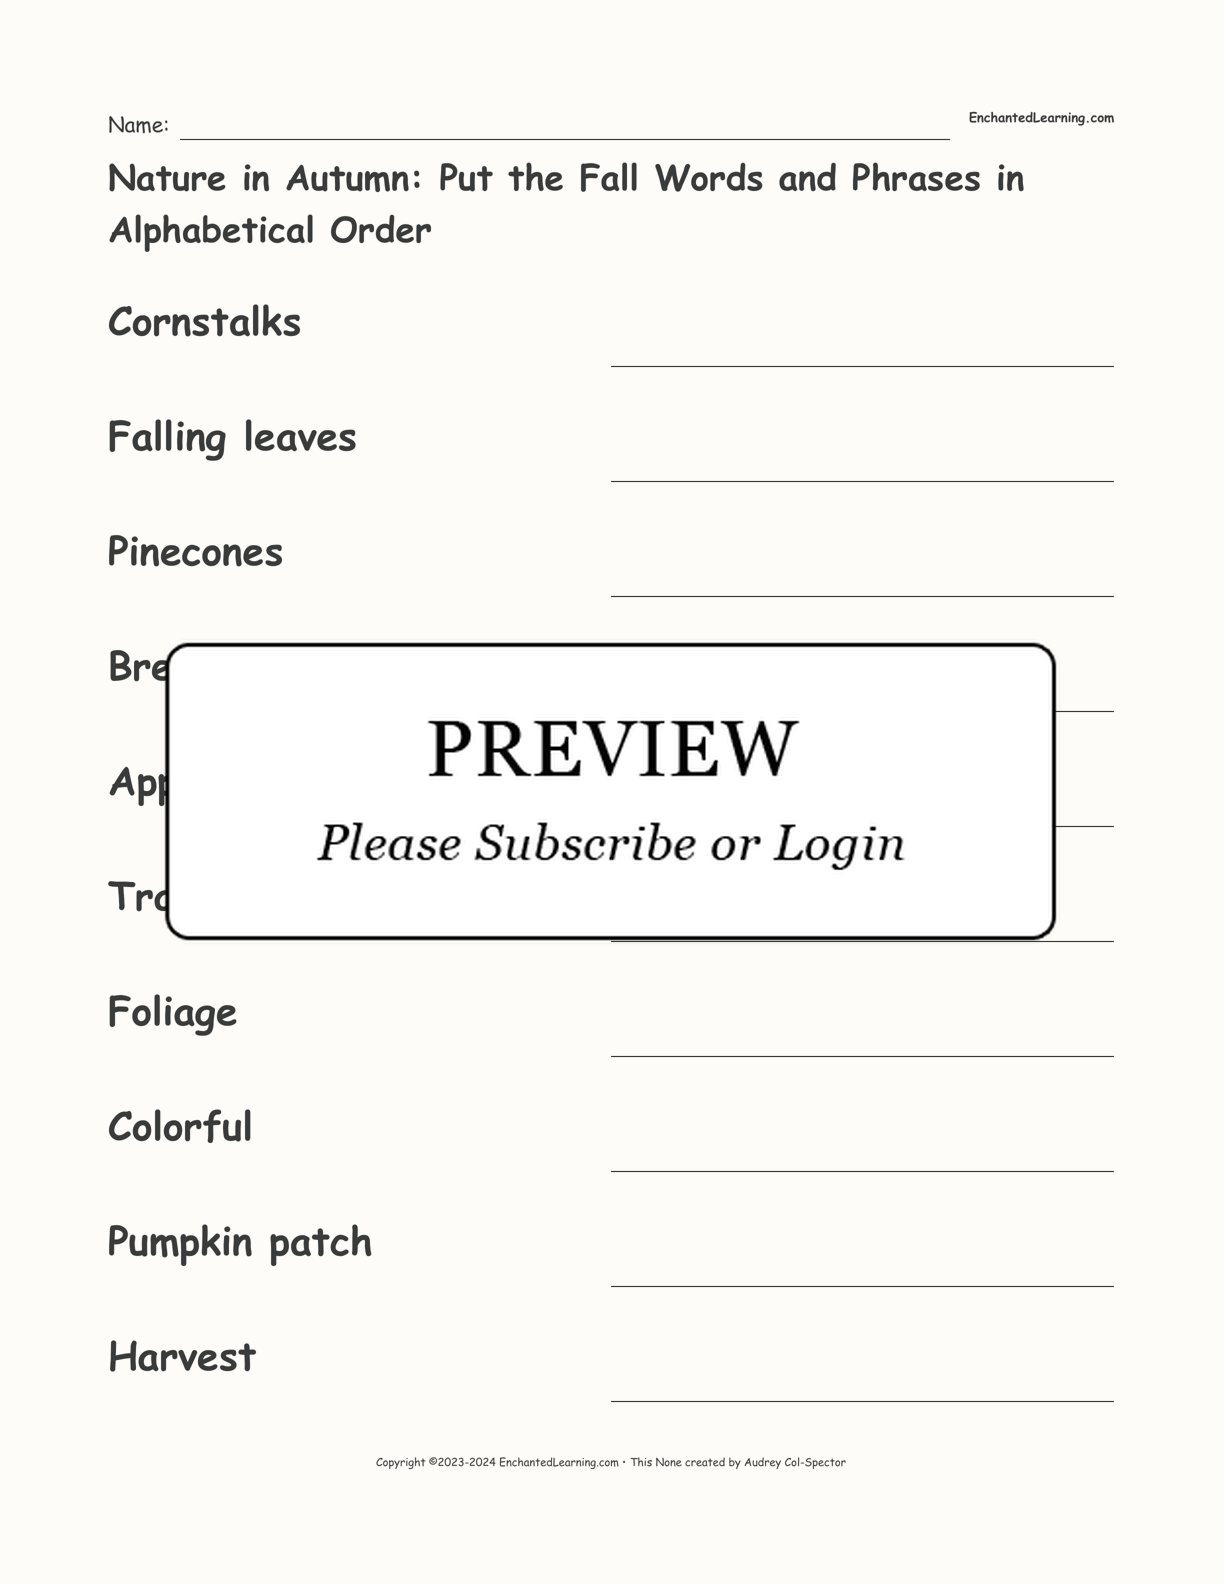 Nature in Autumn: Put the Fall Words and Phrases in Alphabetical Order interactive worksheet page 1